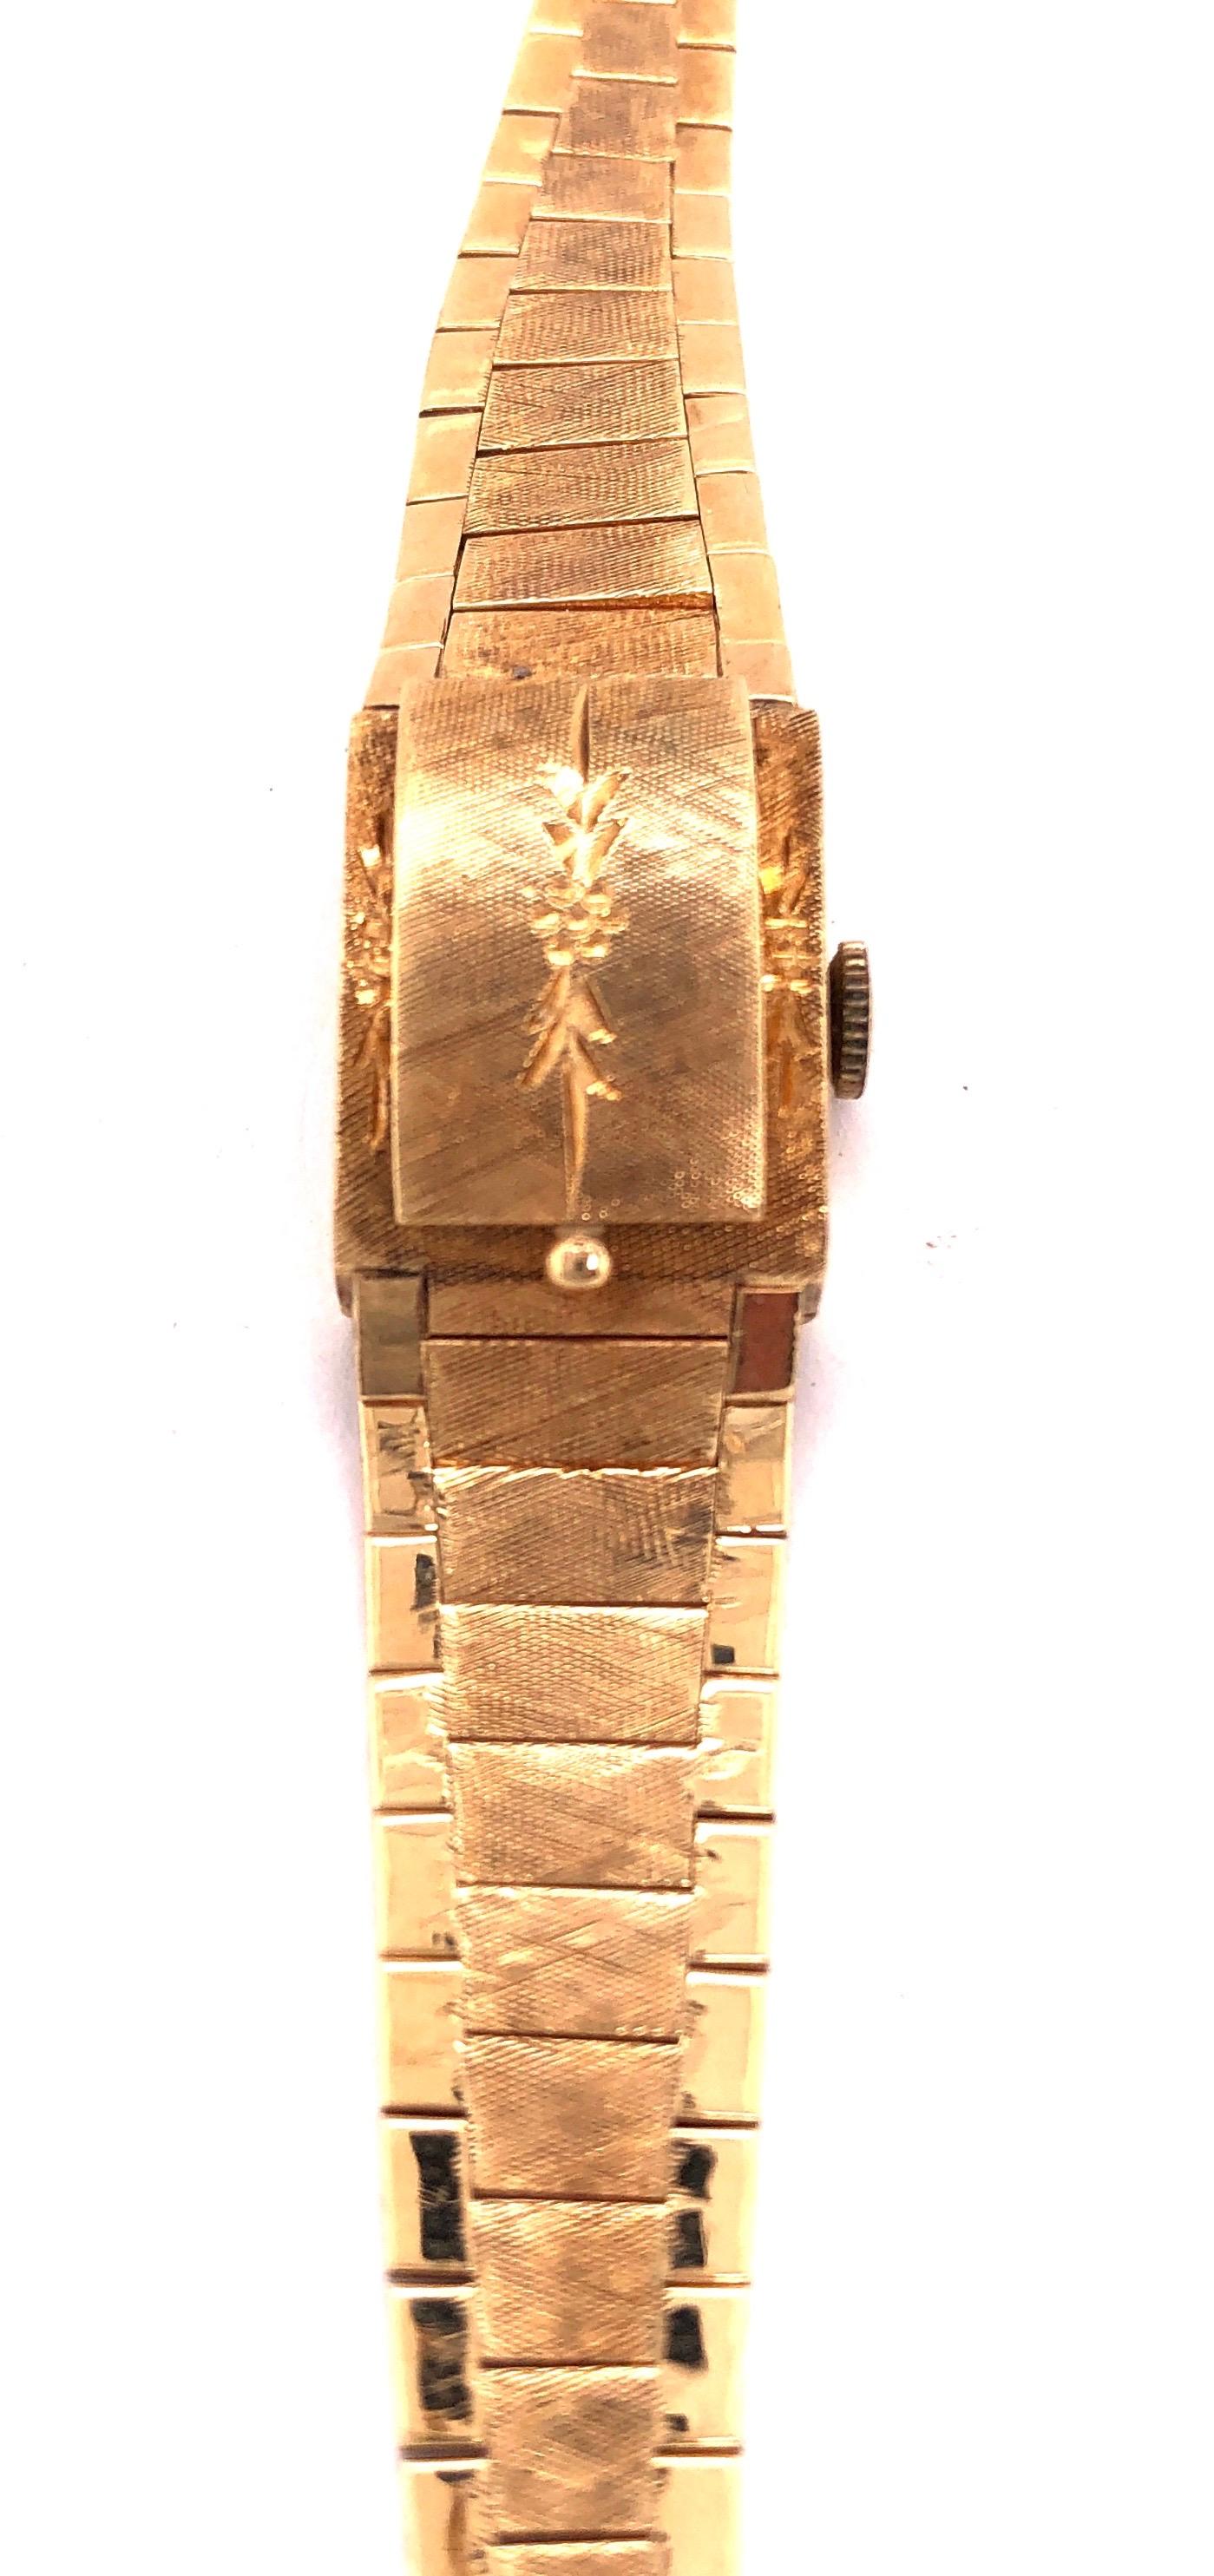 Mid Century Modern Sellita Ladies 14 Karat Yellow Gold Bracelet Wrist Watch 21.9 Grams Swiss 17 Jewels. 6.5 inch. This bracelet wrist watch has a hidden face under an etched cover. Art Deco in Style 21.9 grams. 

Sellita is a Swiss movement